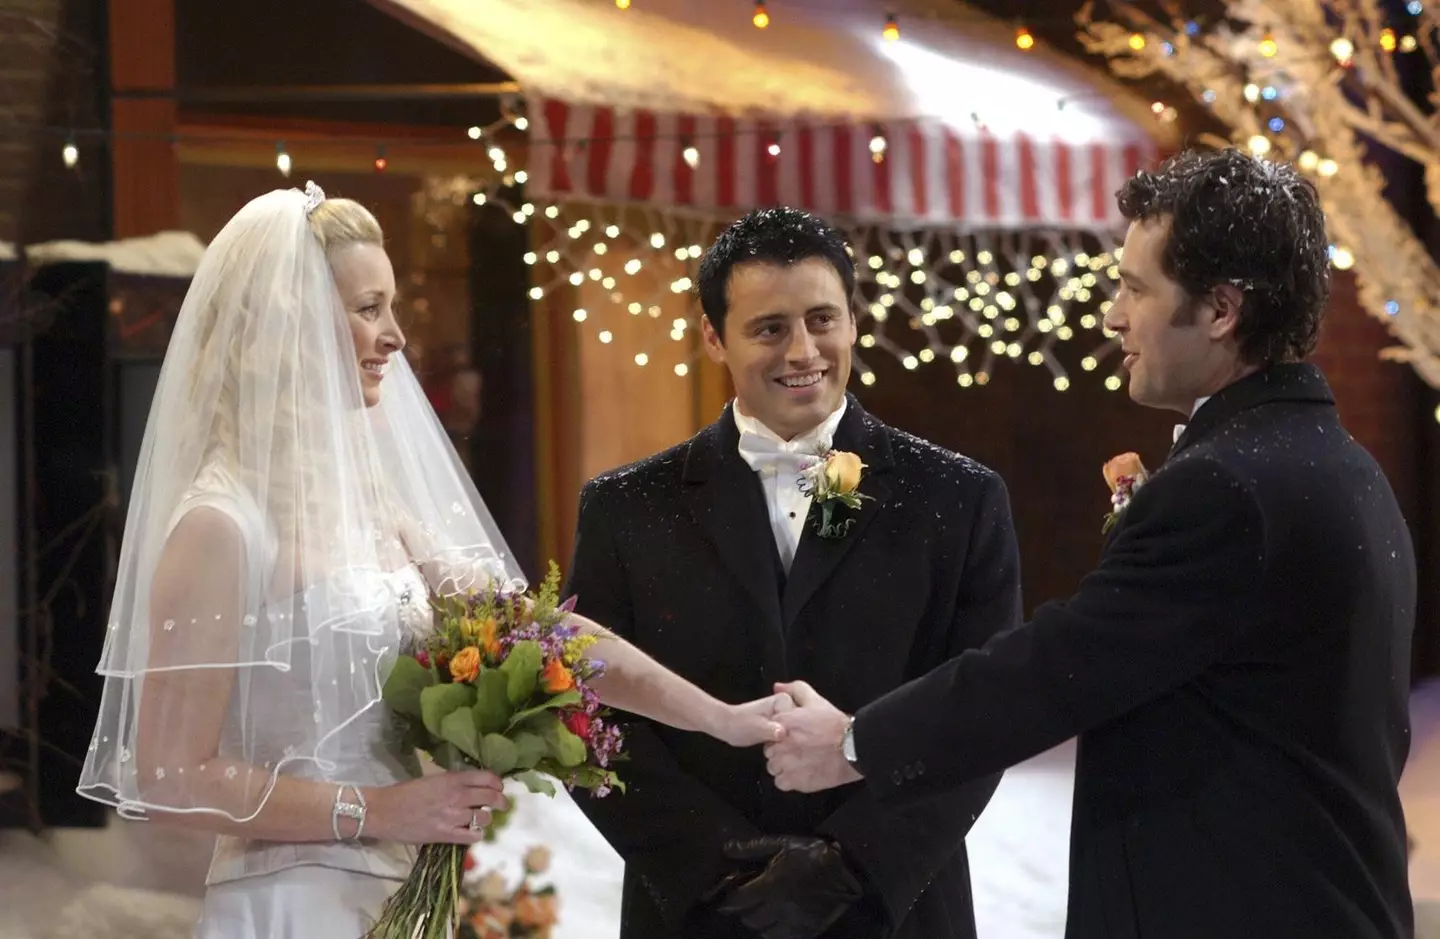 Phoebe and Mike's wedding aired in season ten (